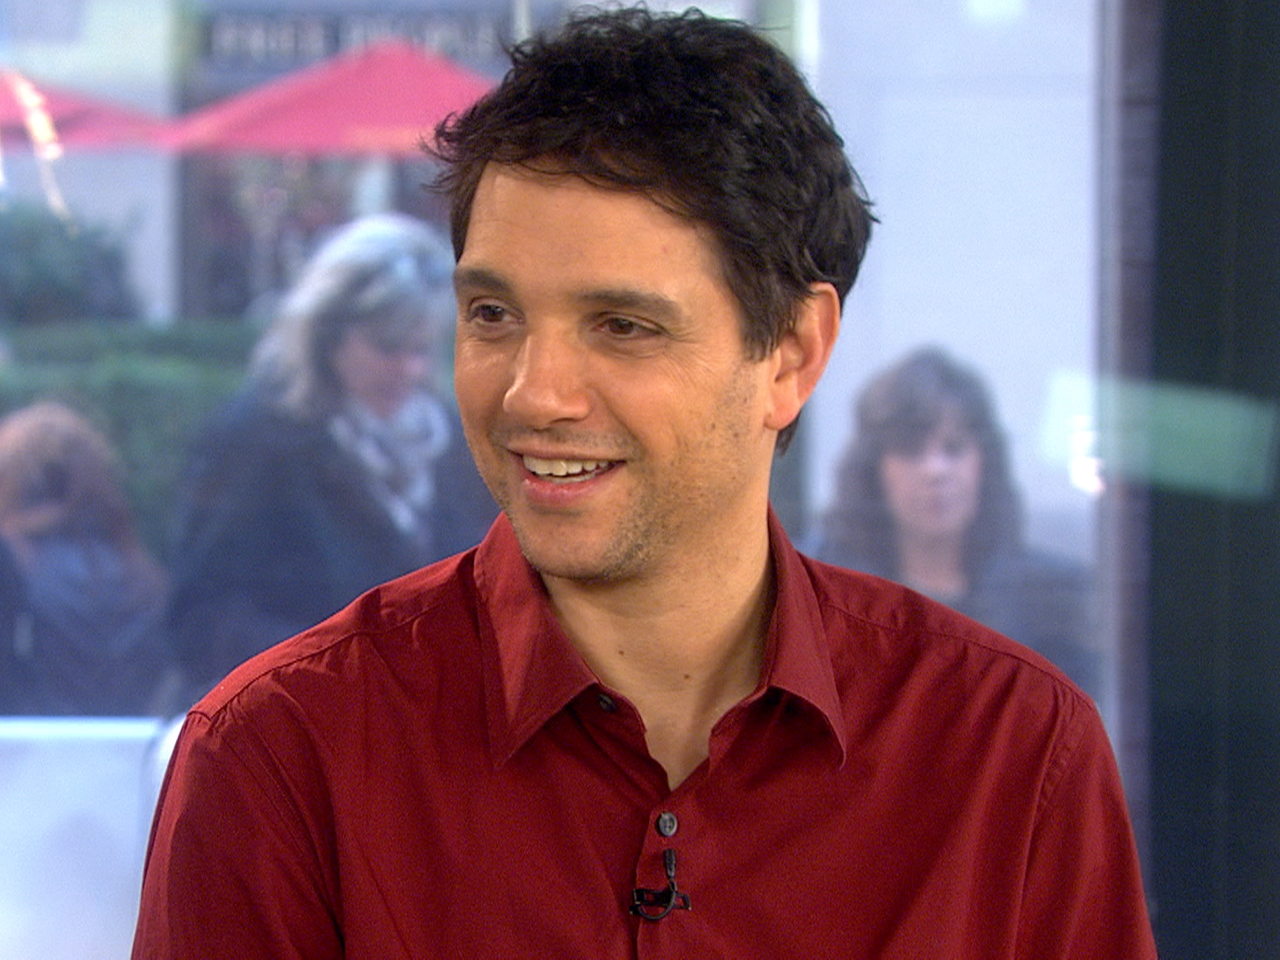 Yes, Ralph Macchio is really 51 years old.